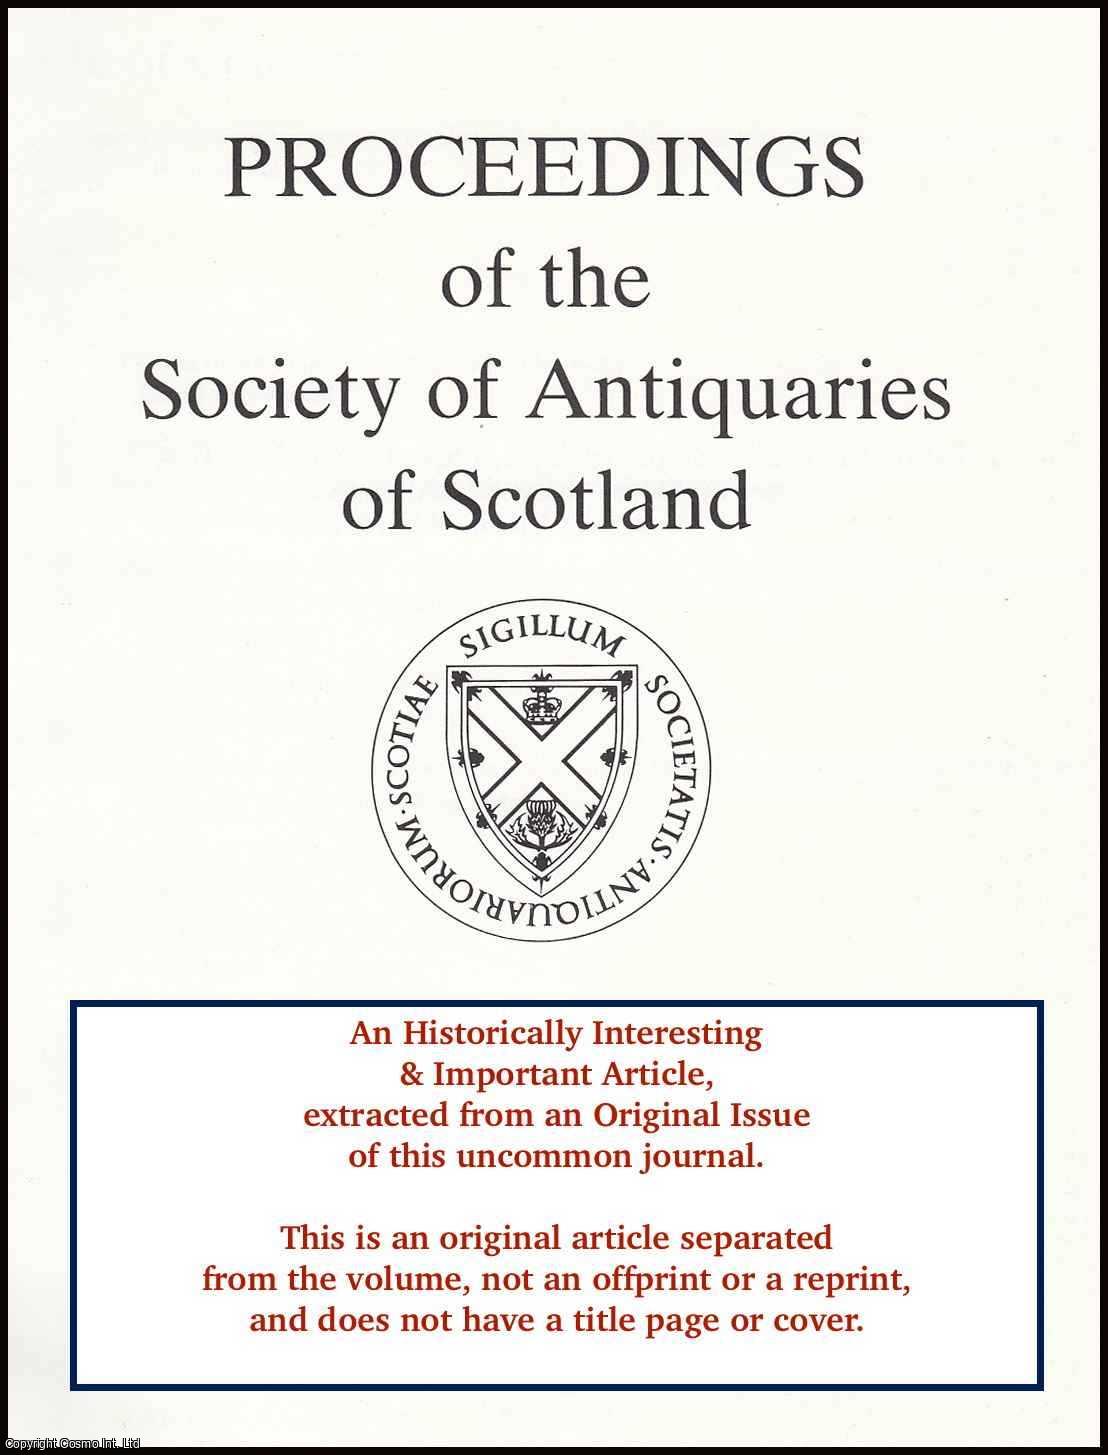 Richard Conolly, Ann MacSween, M. Hastie & C. R. Wickham-Jones - A Possible Neolithic Settlement at Milton of Leys, Inverness. An original article from the Proceedings of the Society of Antiquaries of Scotland, 2003.